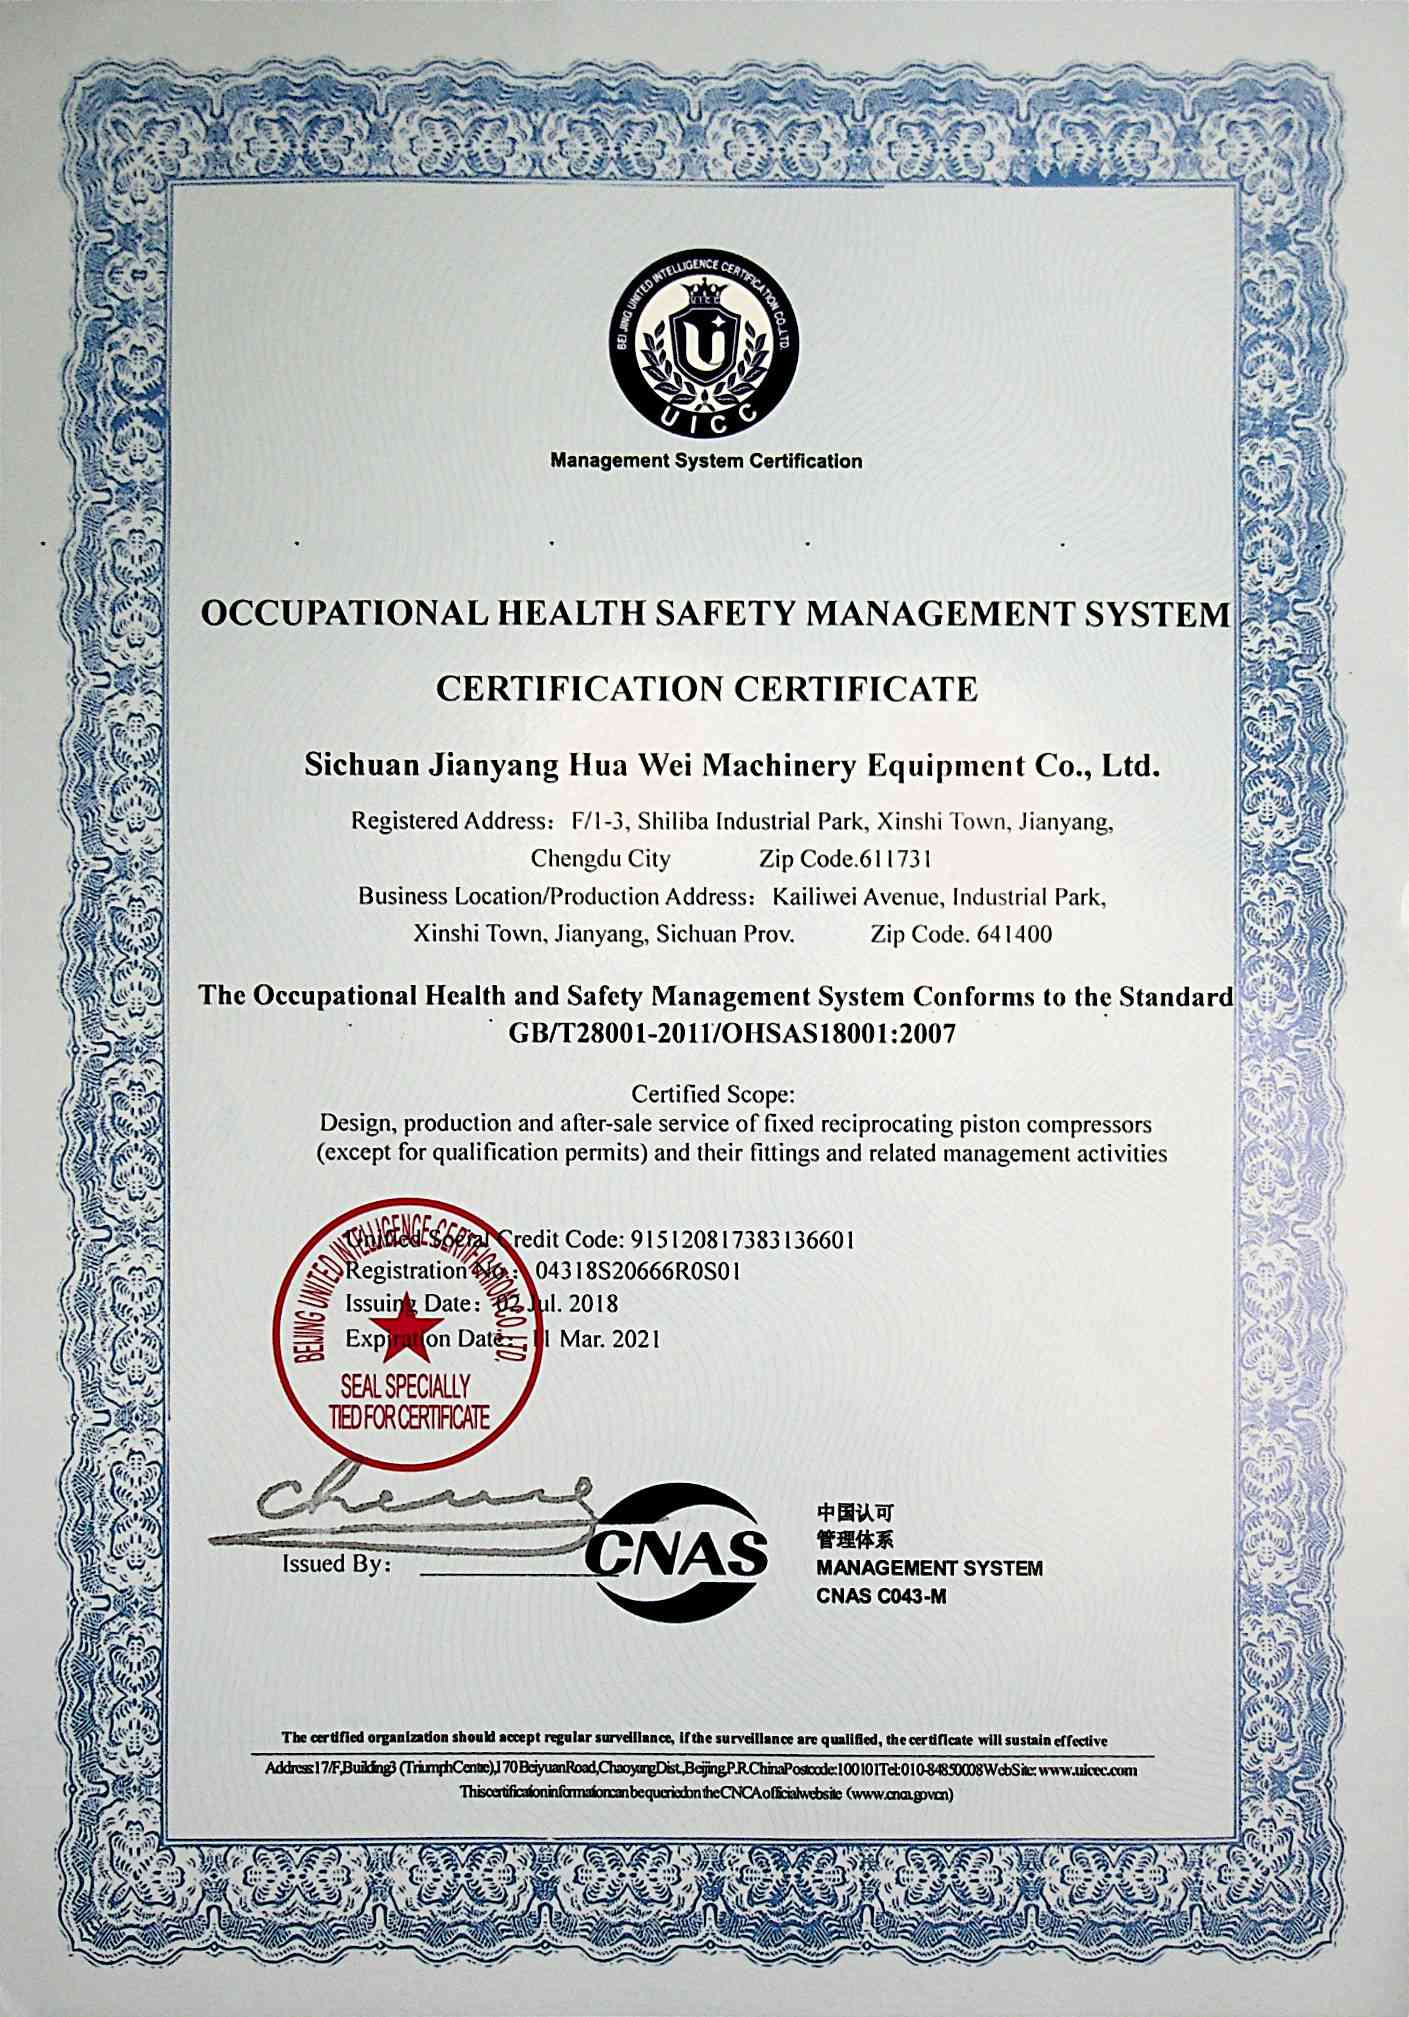 Occupation Health Safety Management System Authentication-English edition